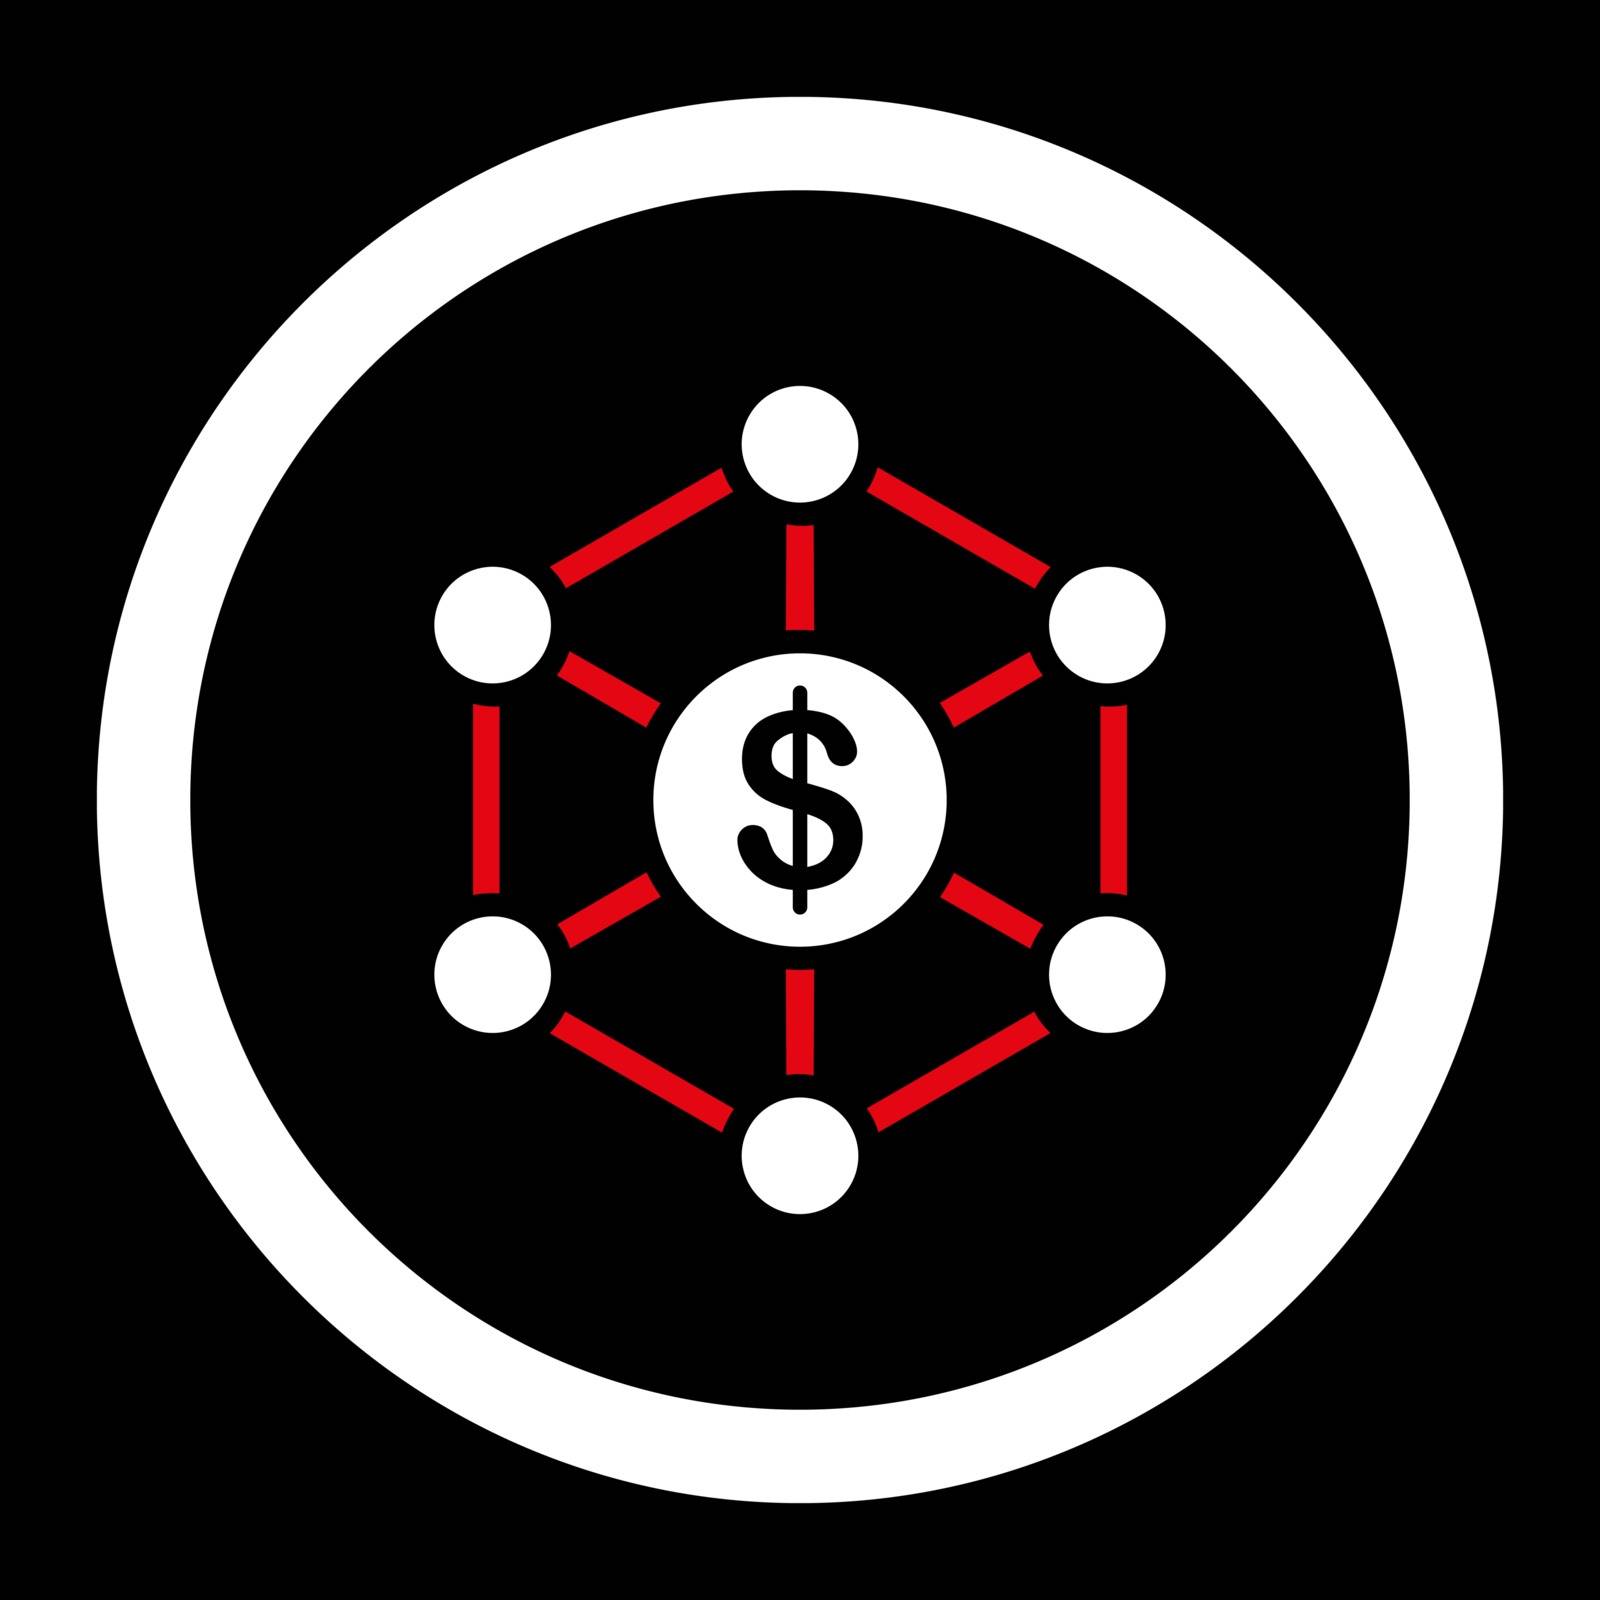 Scheme vector icon. This flat rounded symbol uses red and white colors and isolated on a black background.